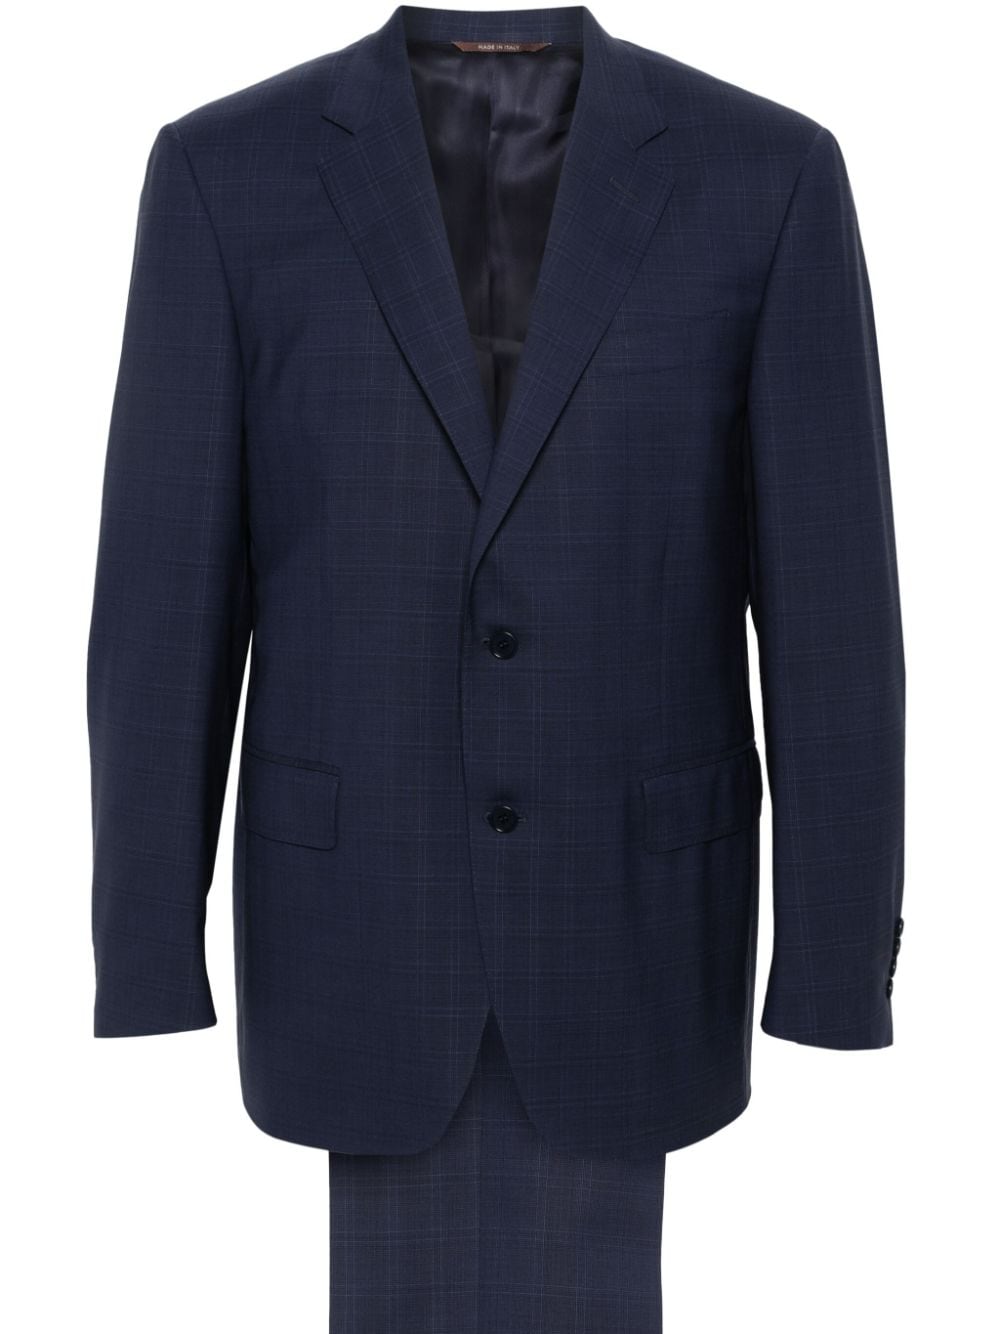 Canali single-breasted wool suit - Blue von Canali